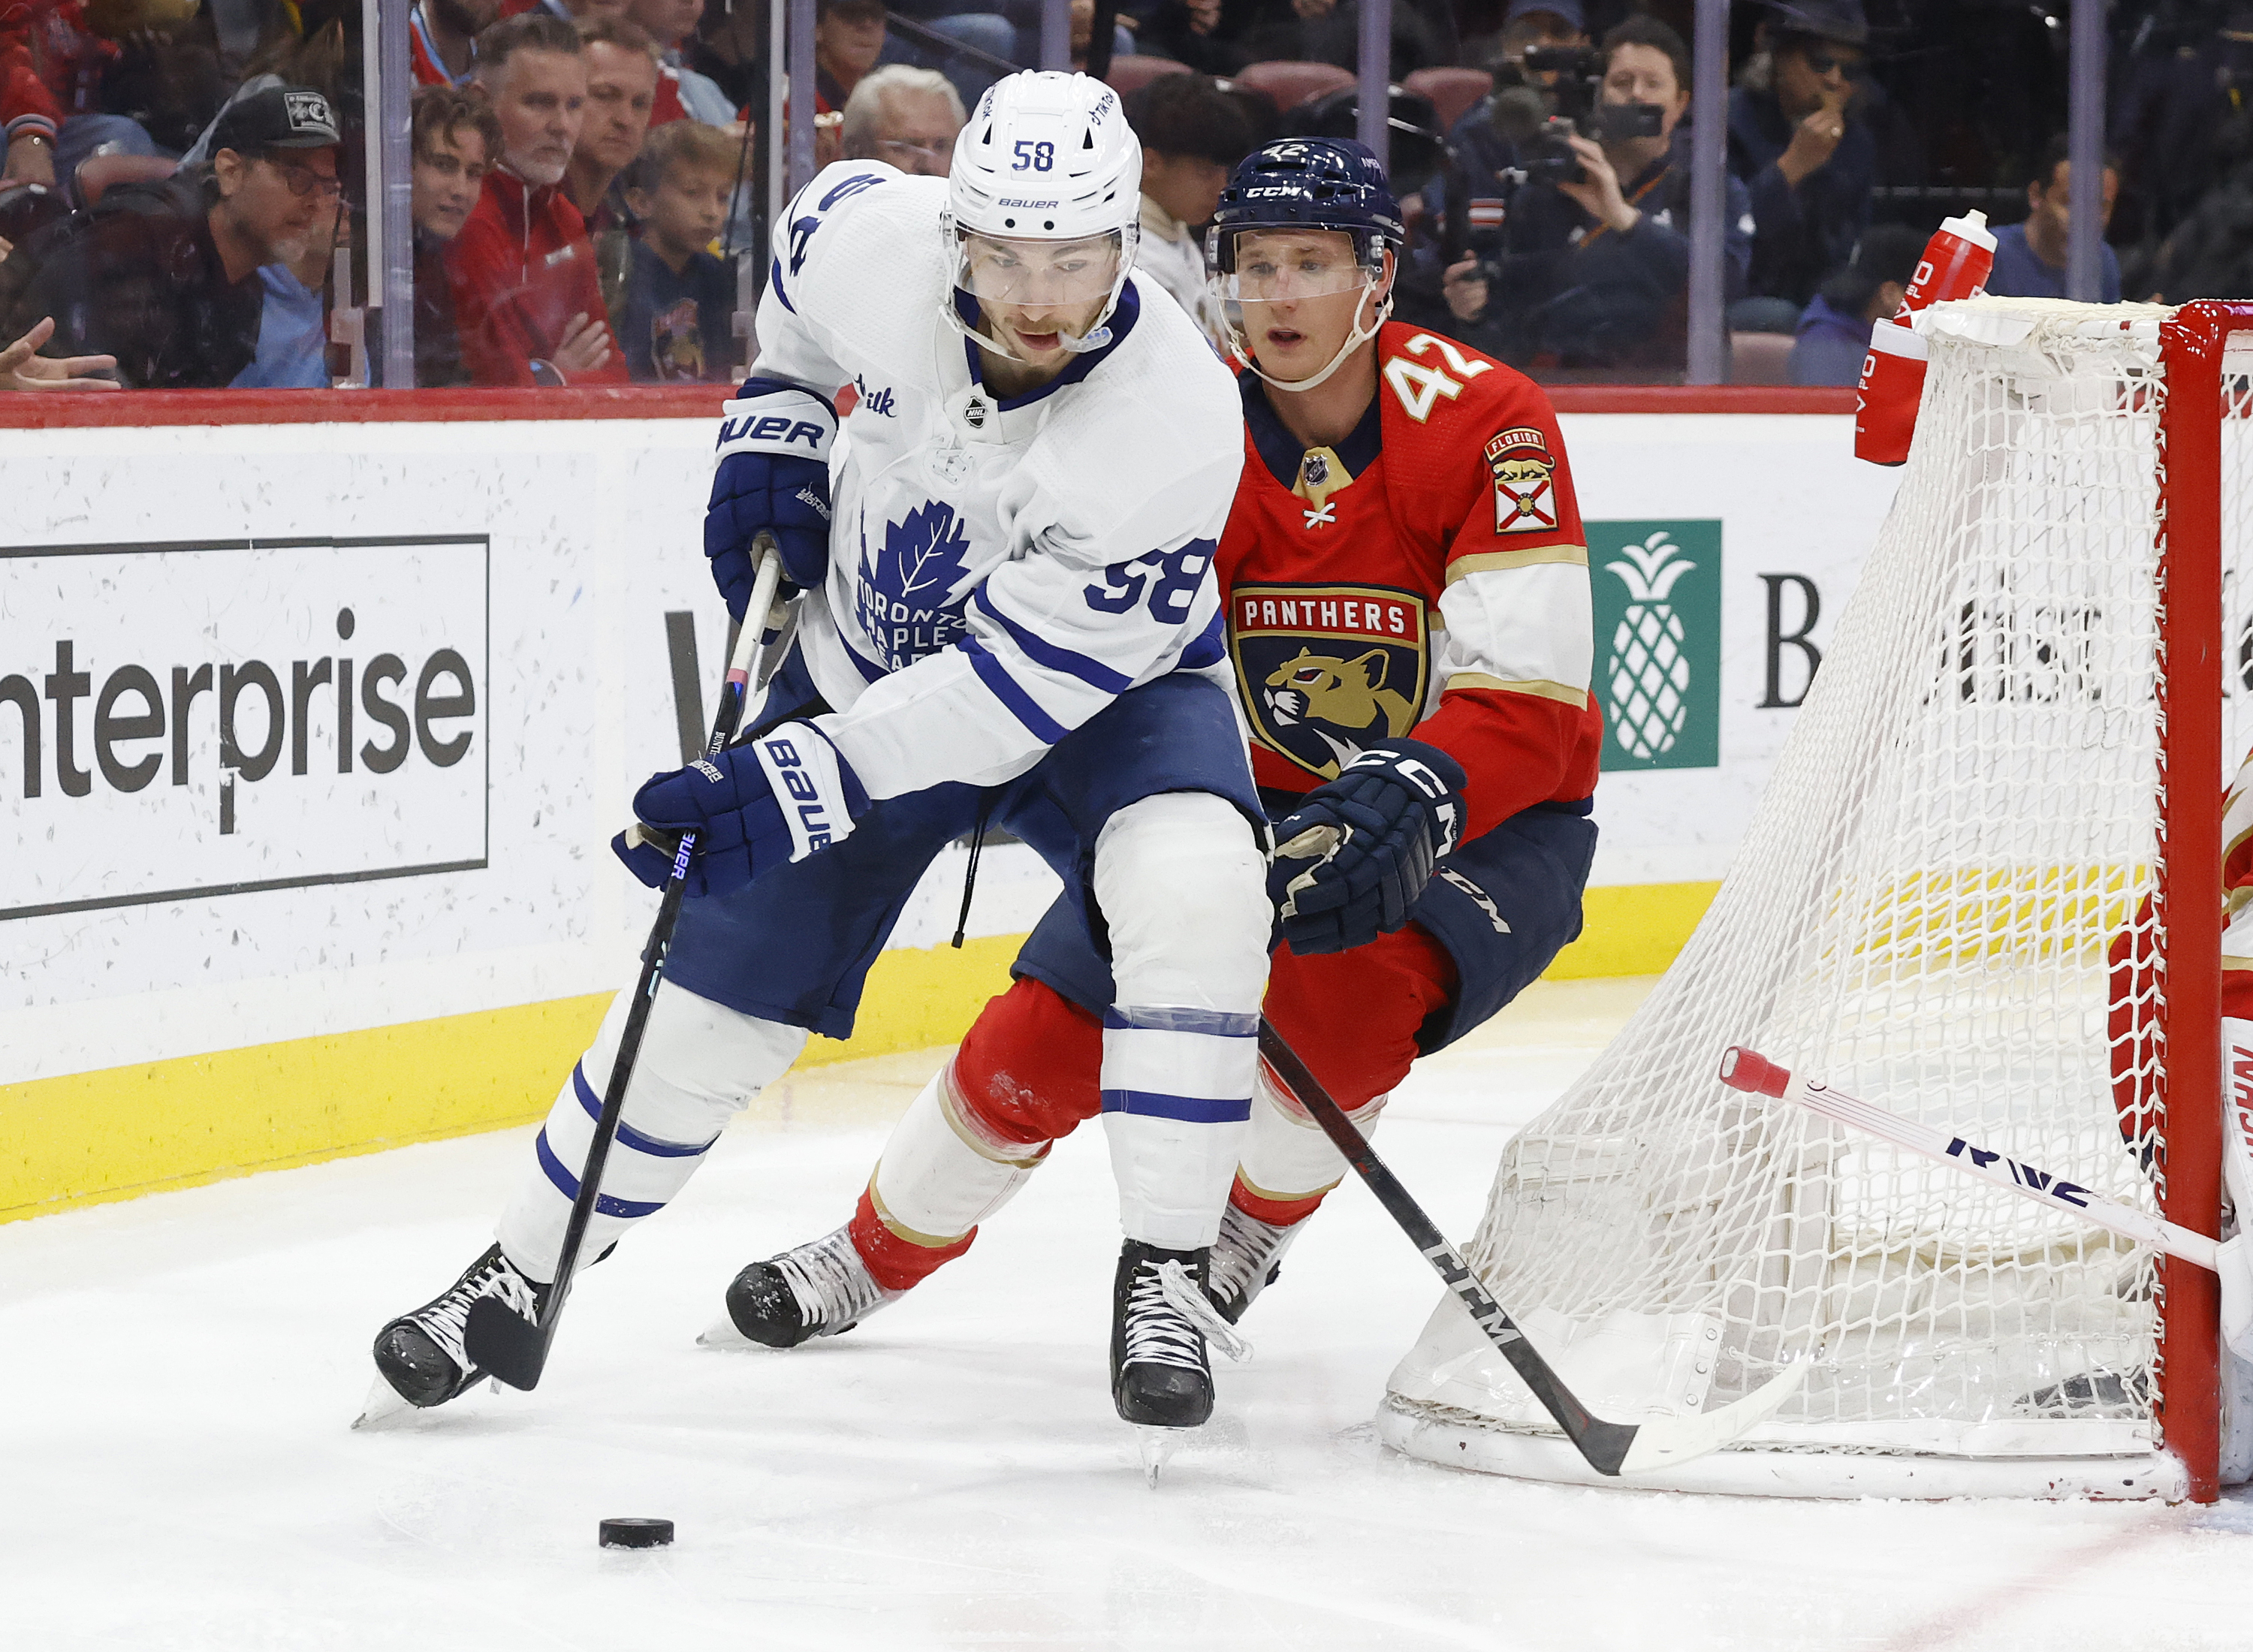 Panthers' controversial move to keep Leafs fans out of their arena